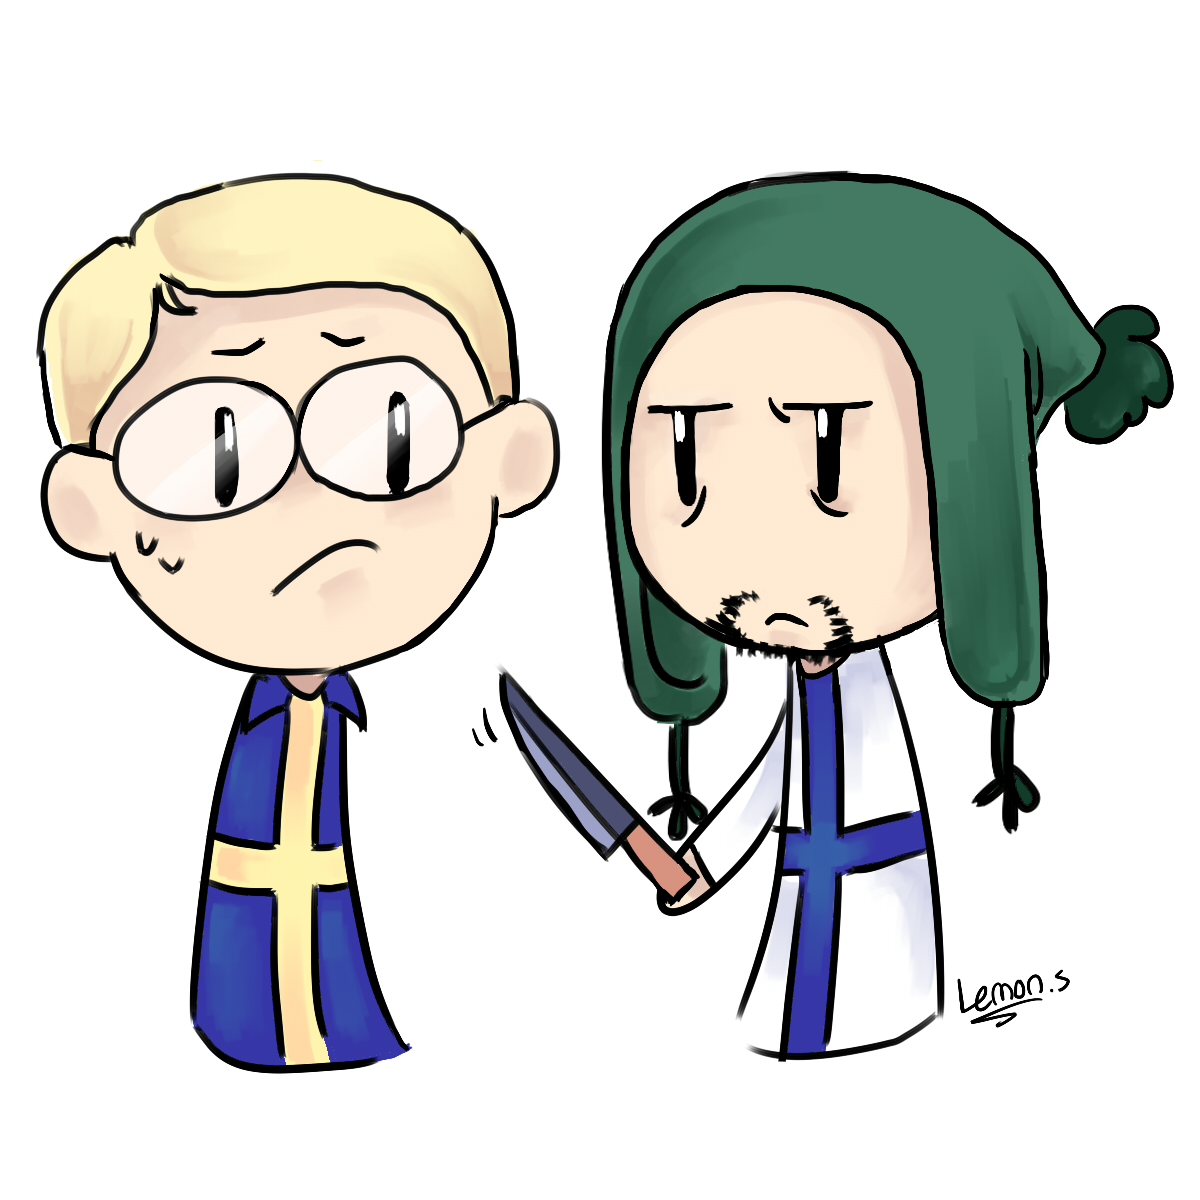 Sweden and Finland doodle satwcomic.com